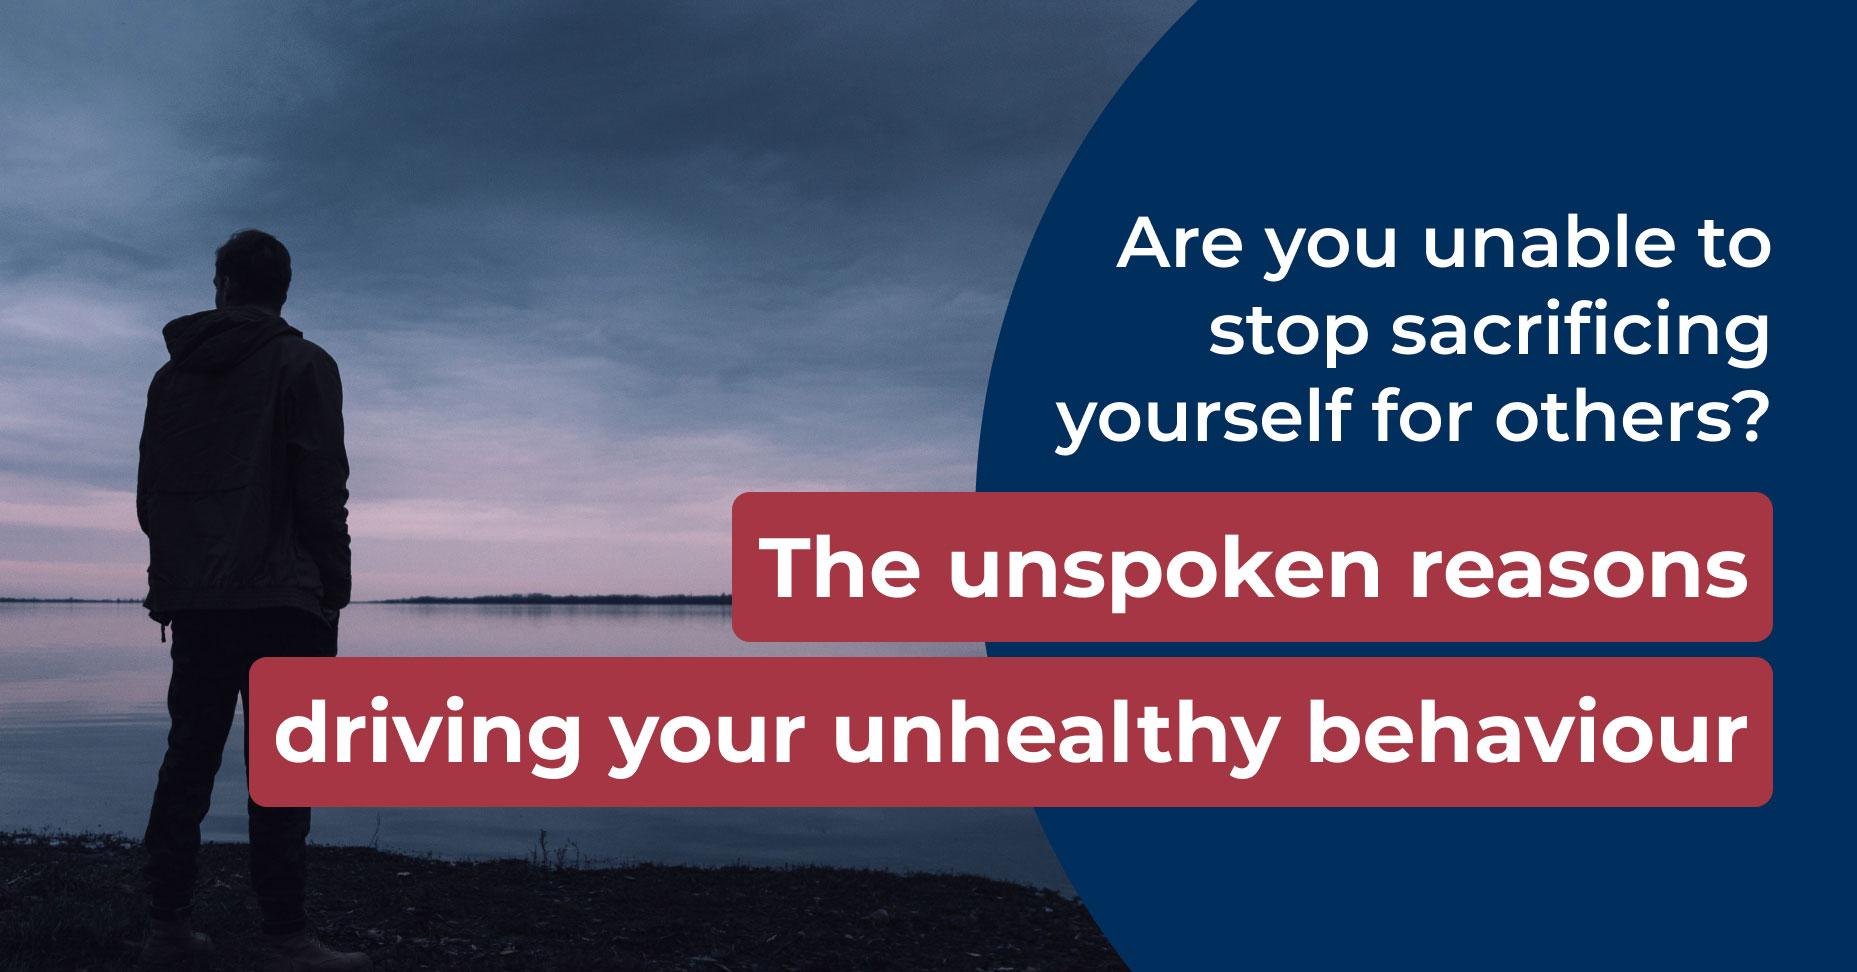 Are you unable to stop sacrificing yourself for others? The unspoken reasons driving your unhealthy behaviour